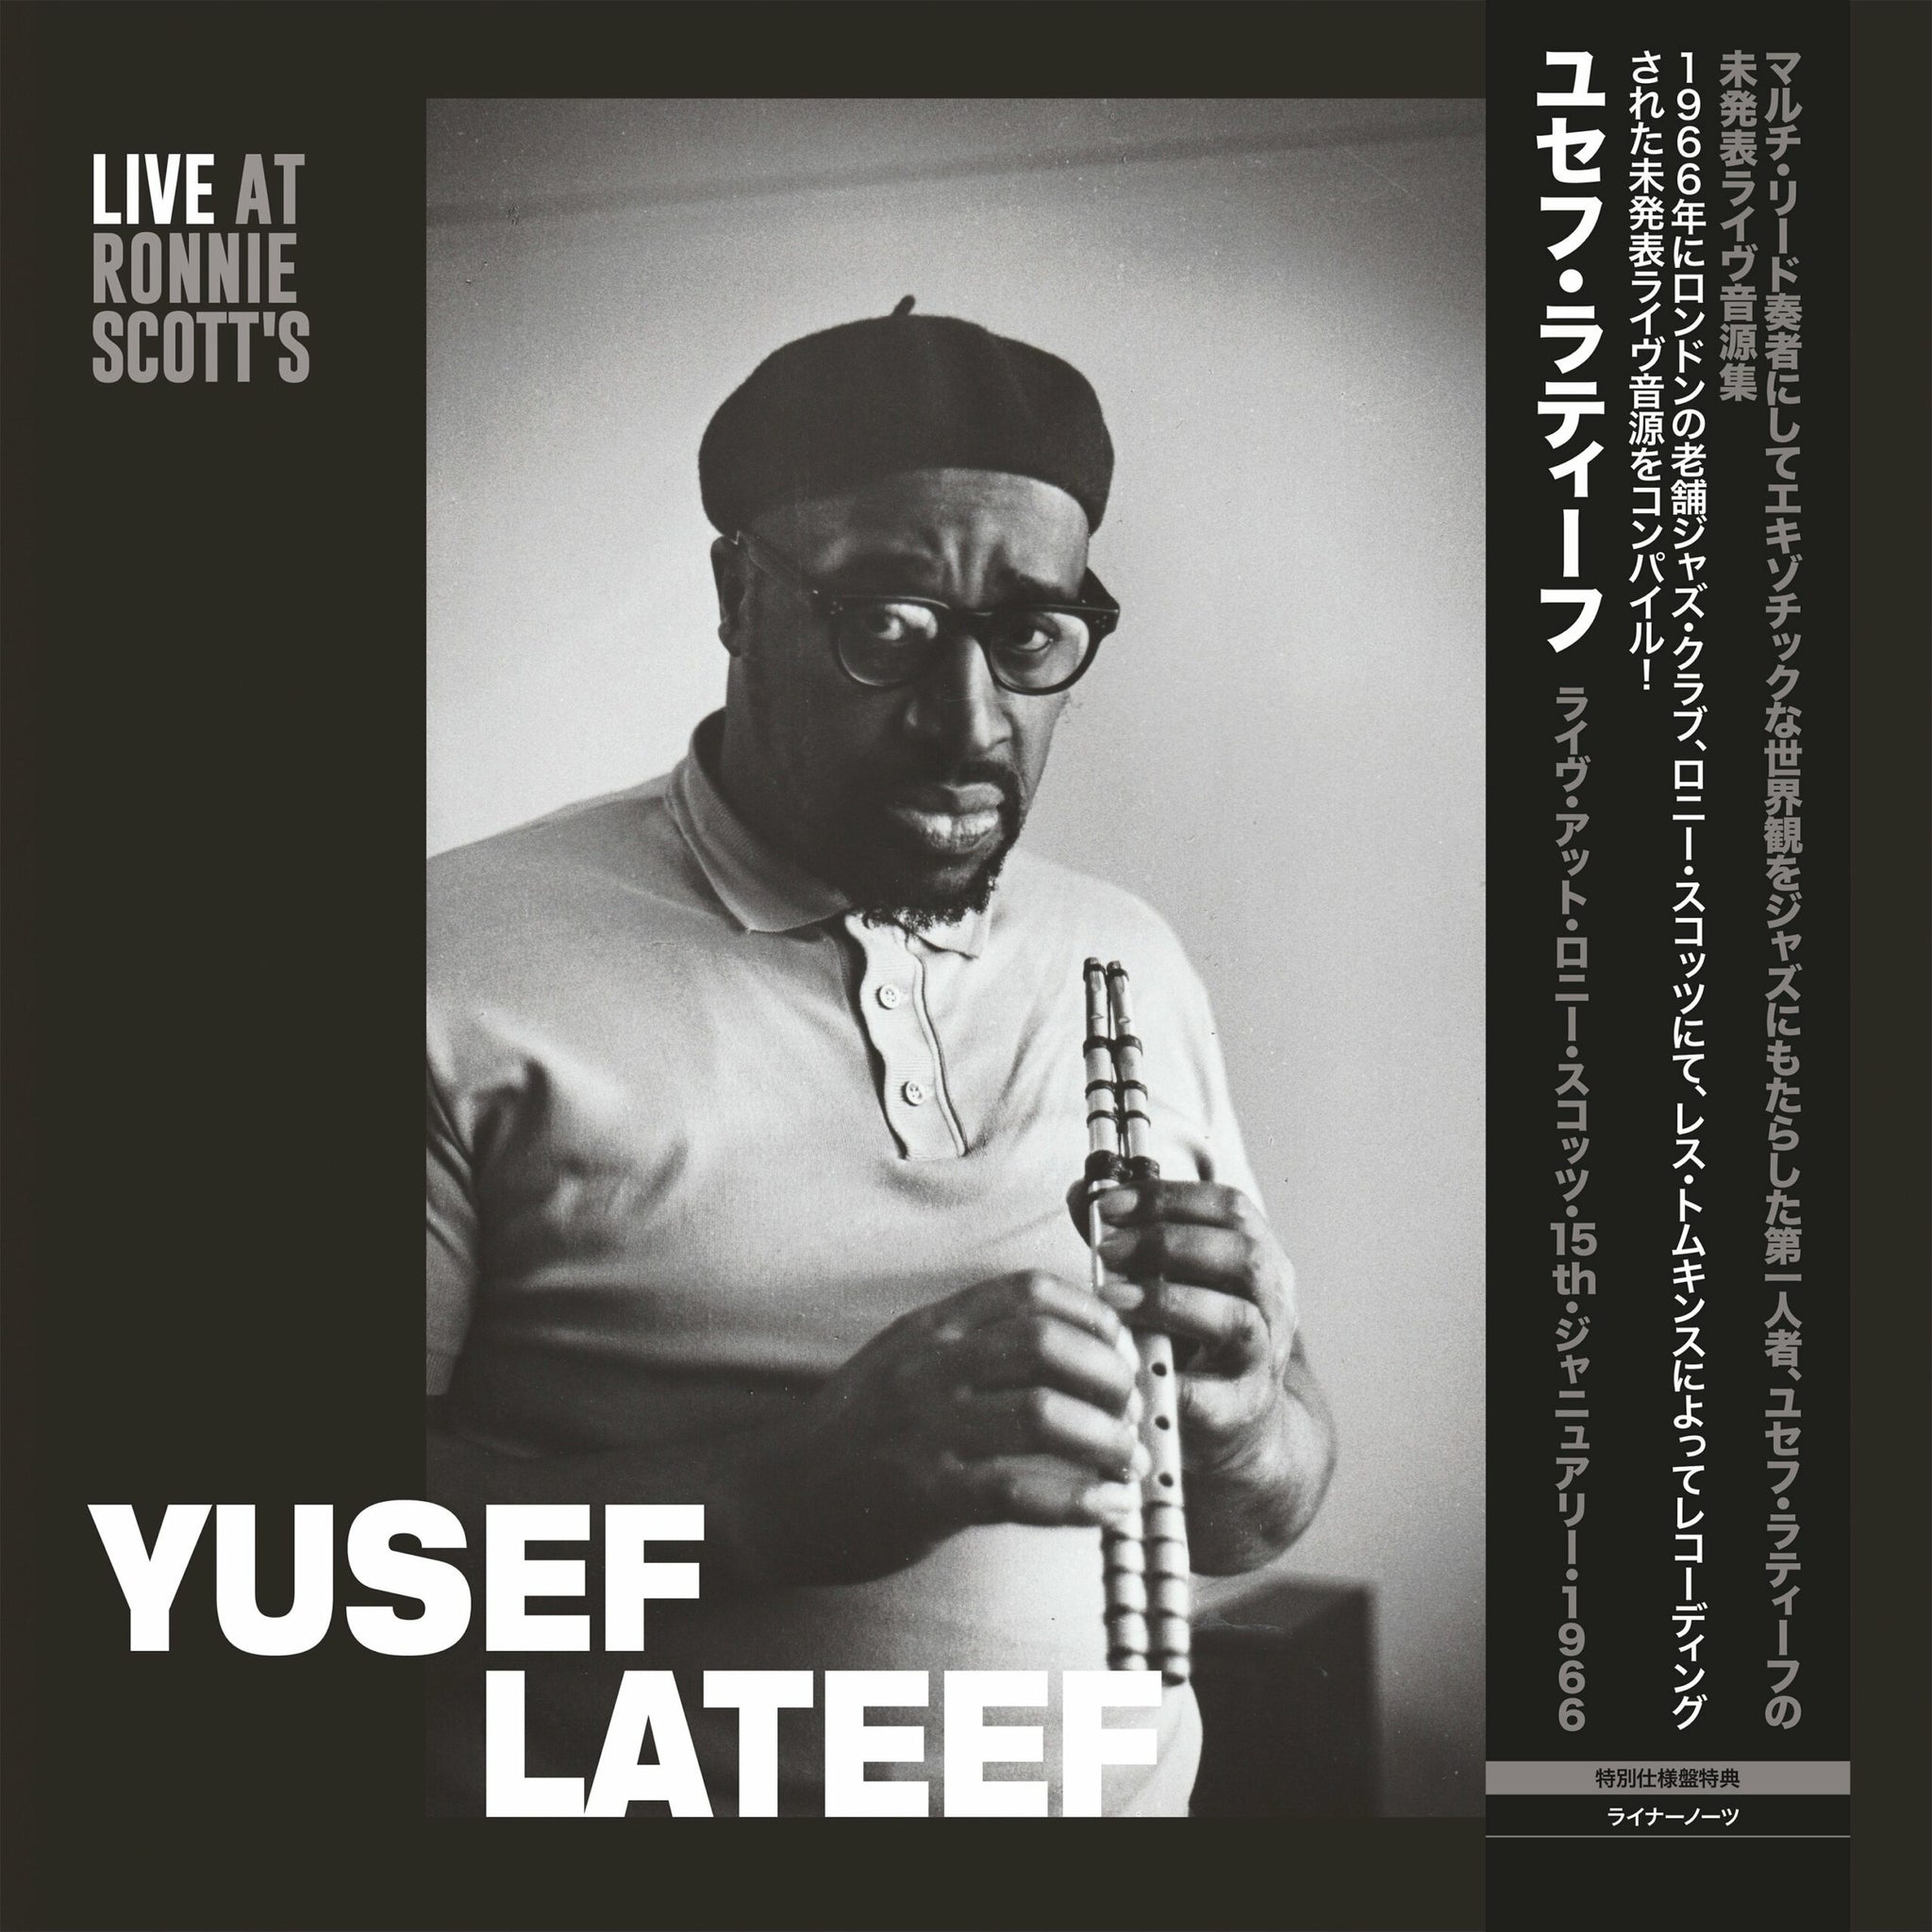 YUSEF LATEEF - Live at Ronnie Scott’s (Official Japanese Edition) - LP - Limited 180g Vinyl